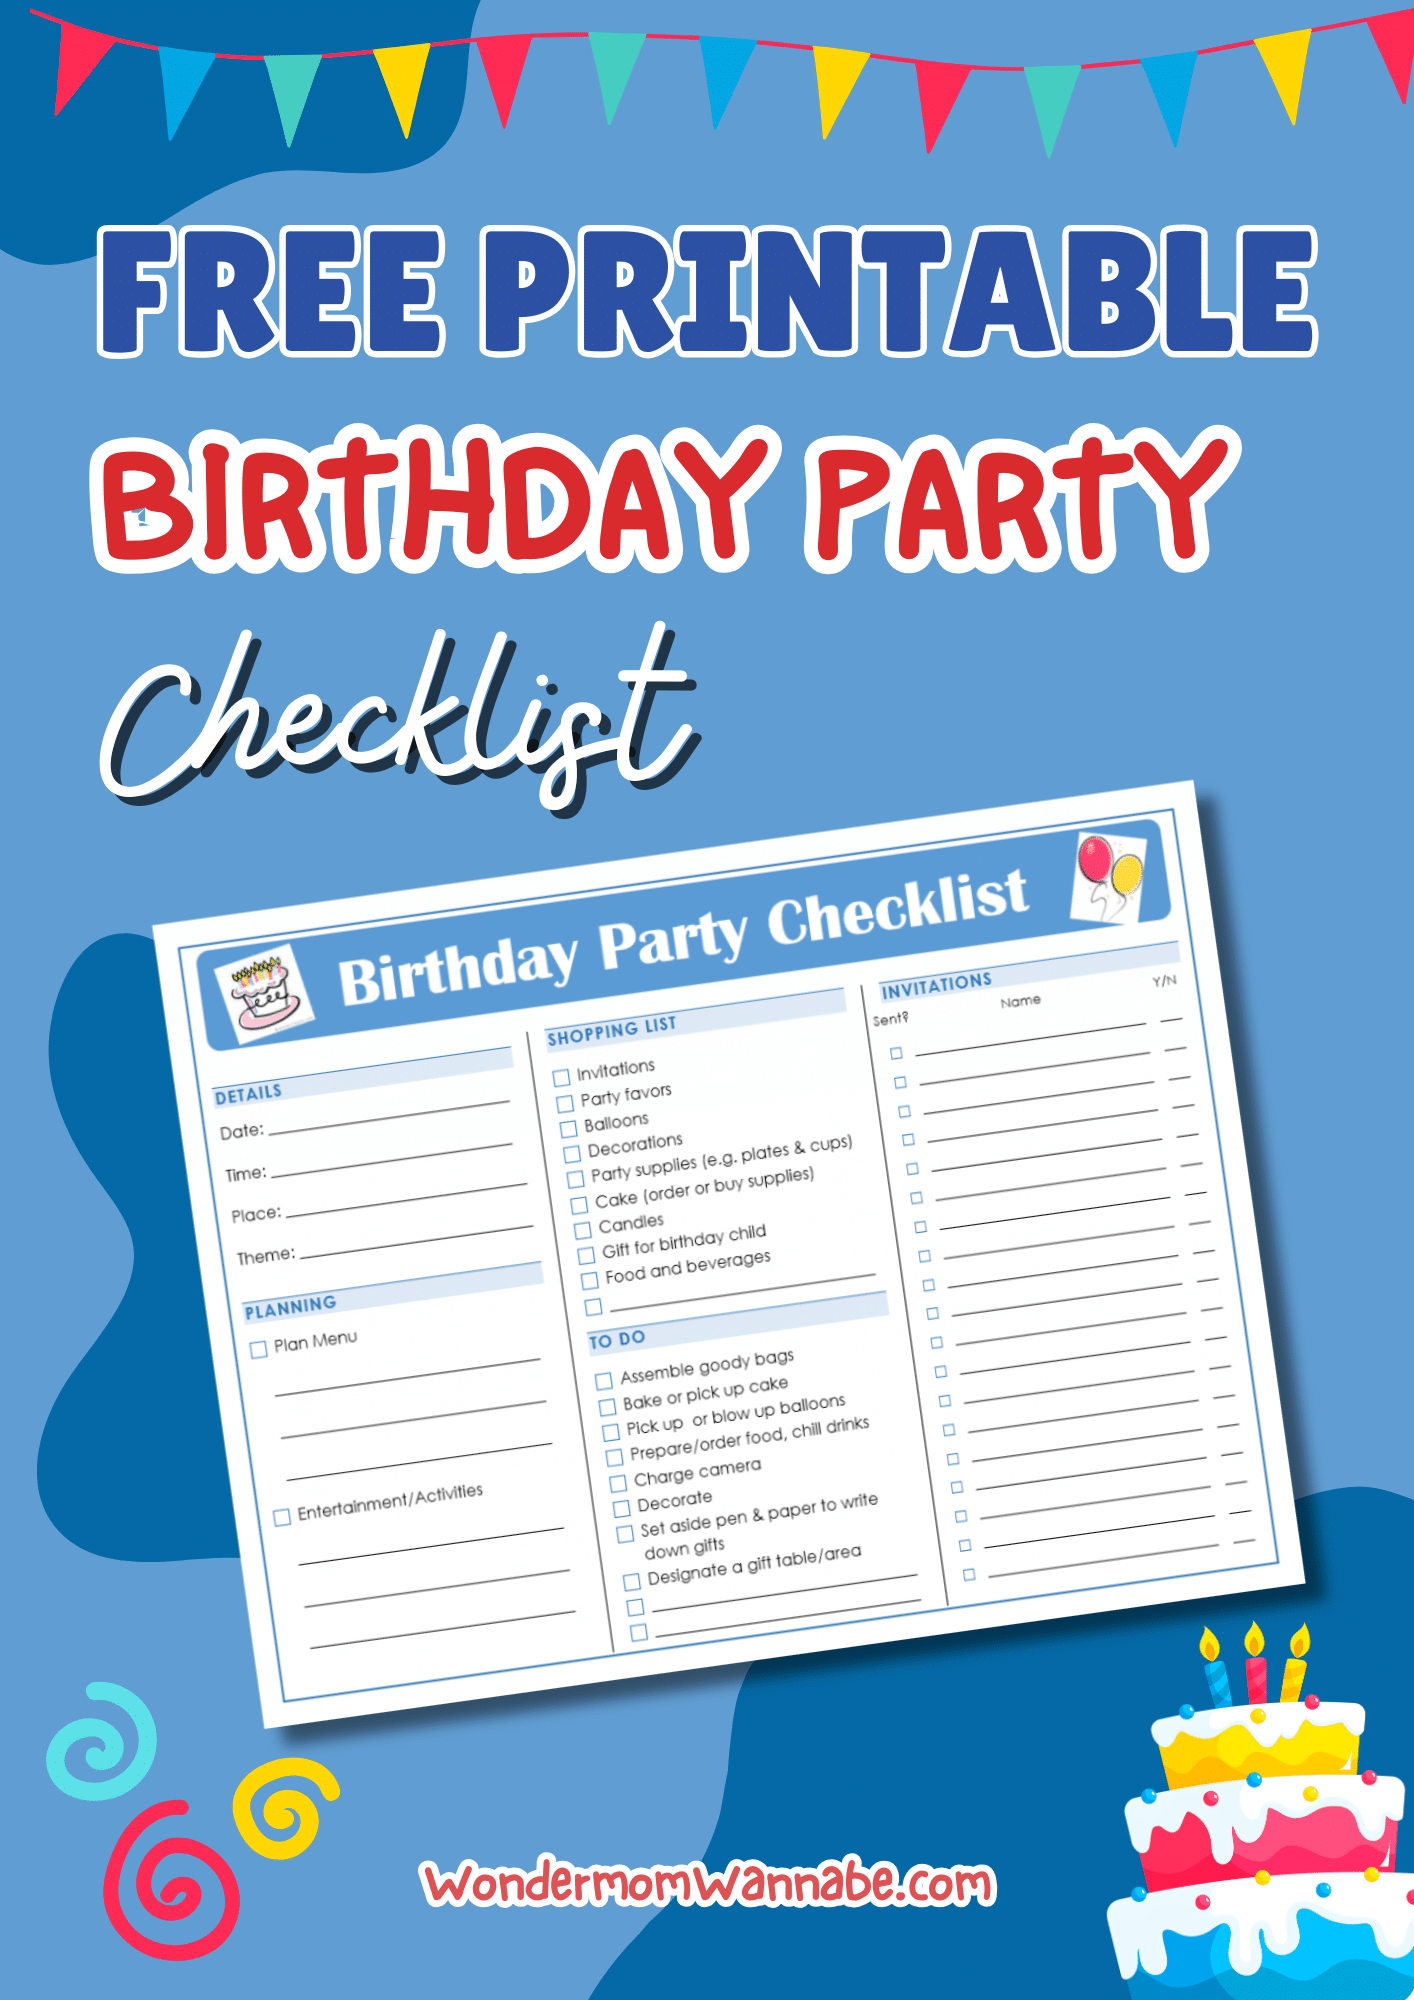 Keywords: free printable birthday party checklist

Updated Description: Get your hands on a valuable free printable birthday party checklist.